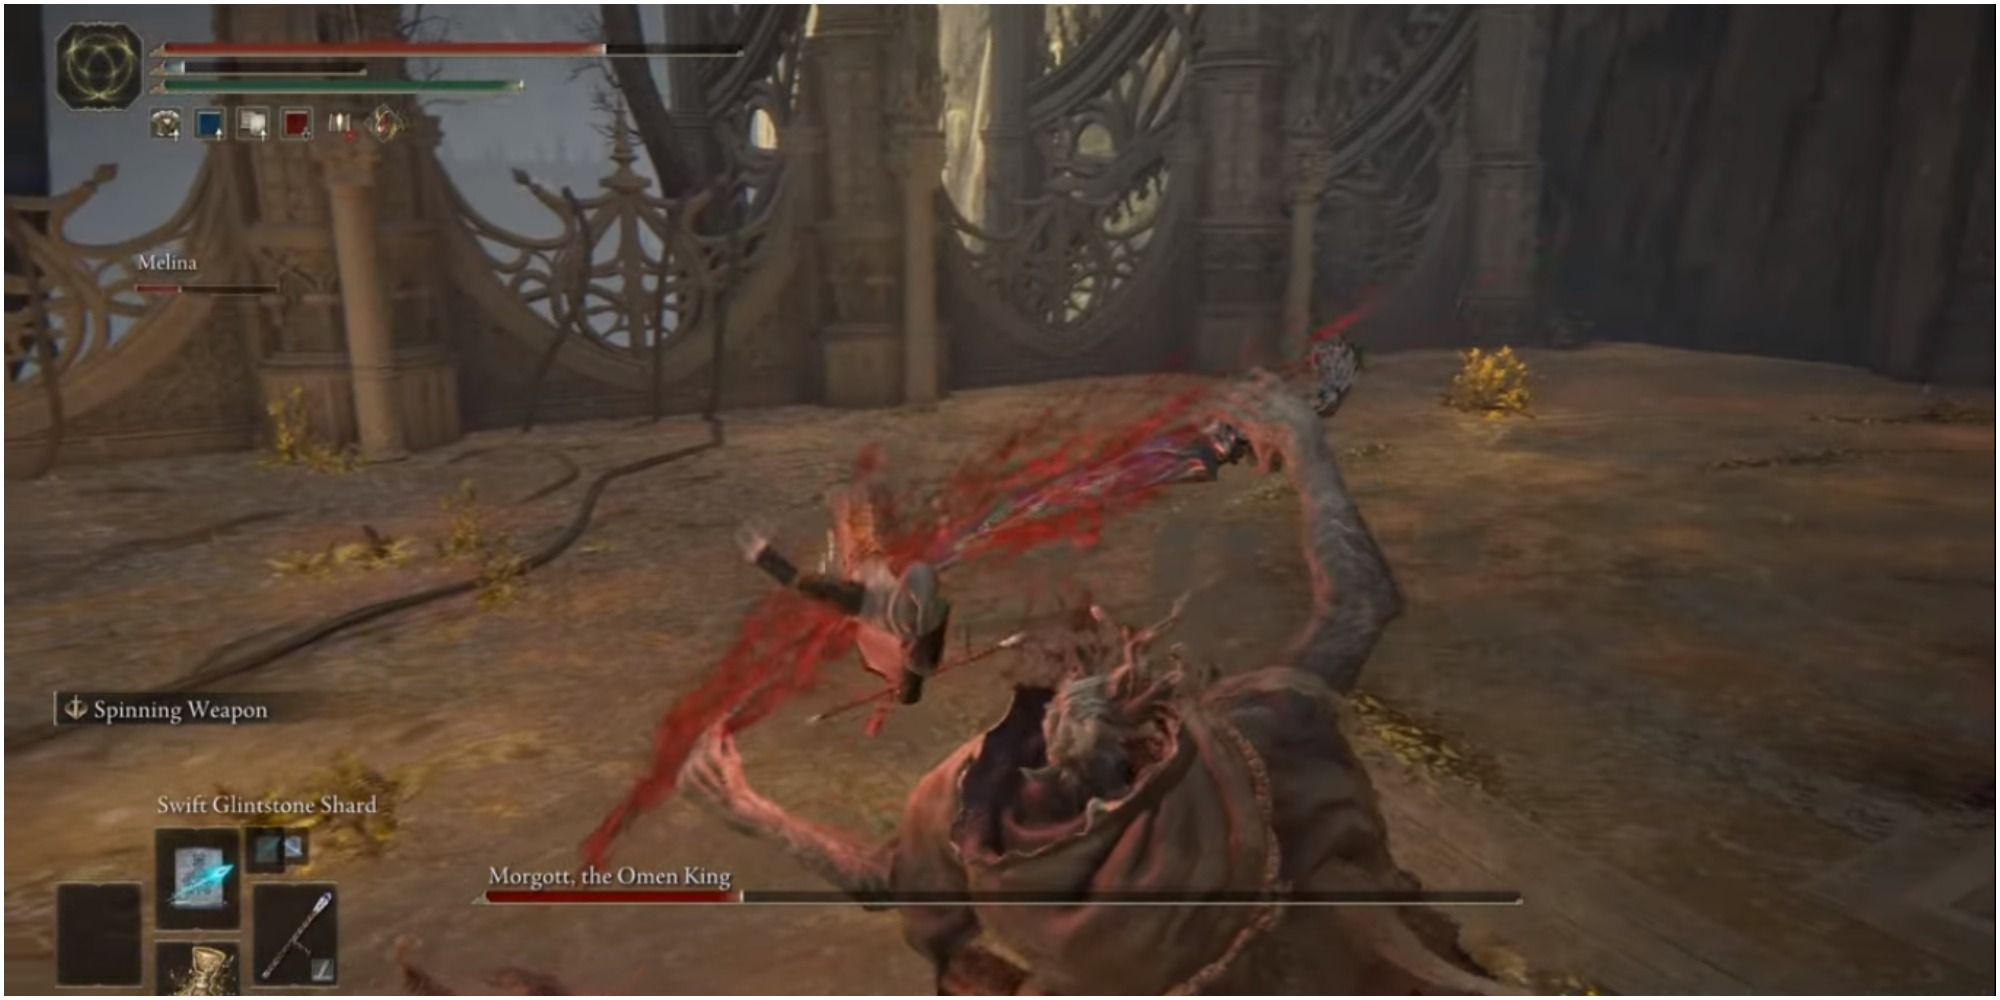 The boss using his Blood Thrust on the player.